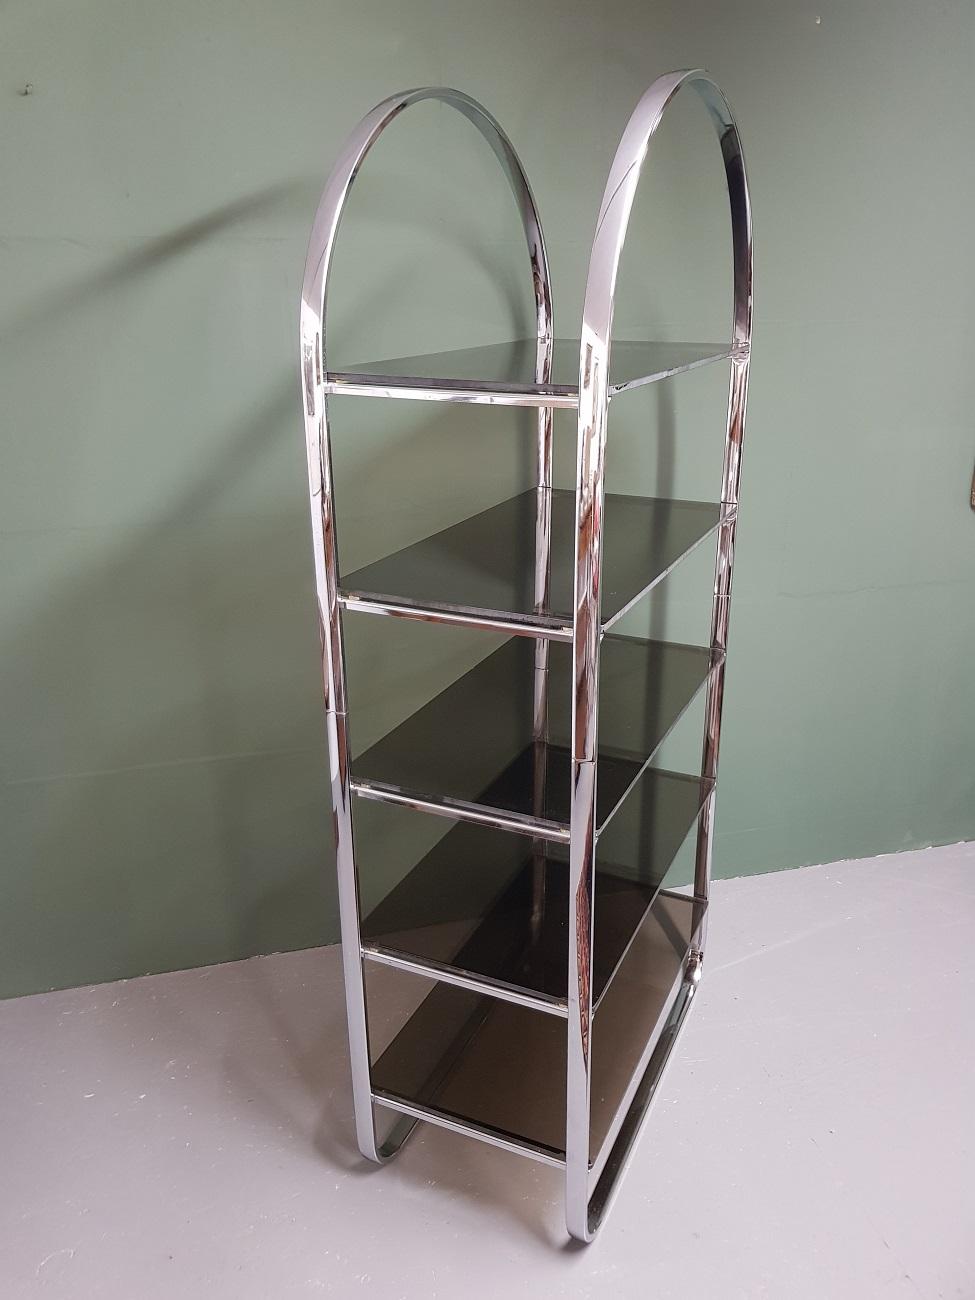 20th Century Mid-Century Modern Milo Baughman Style Chrome Etagere with Smoked Glass Shelves For Sale